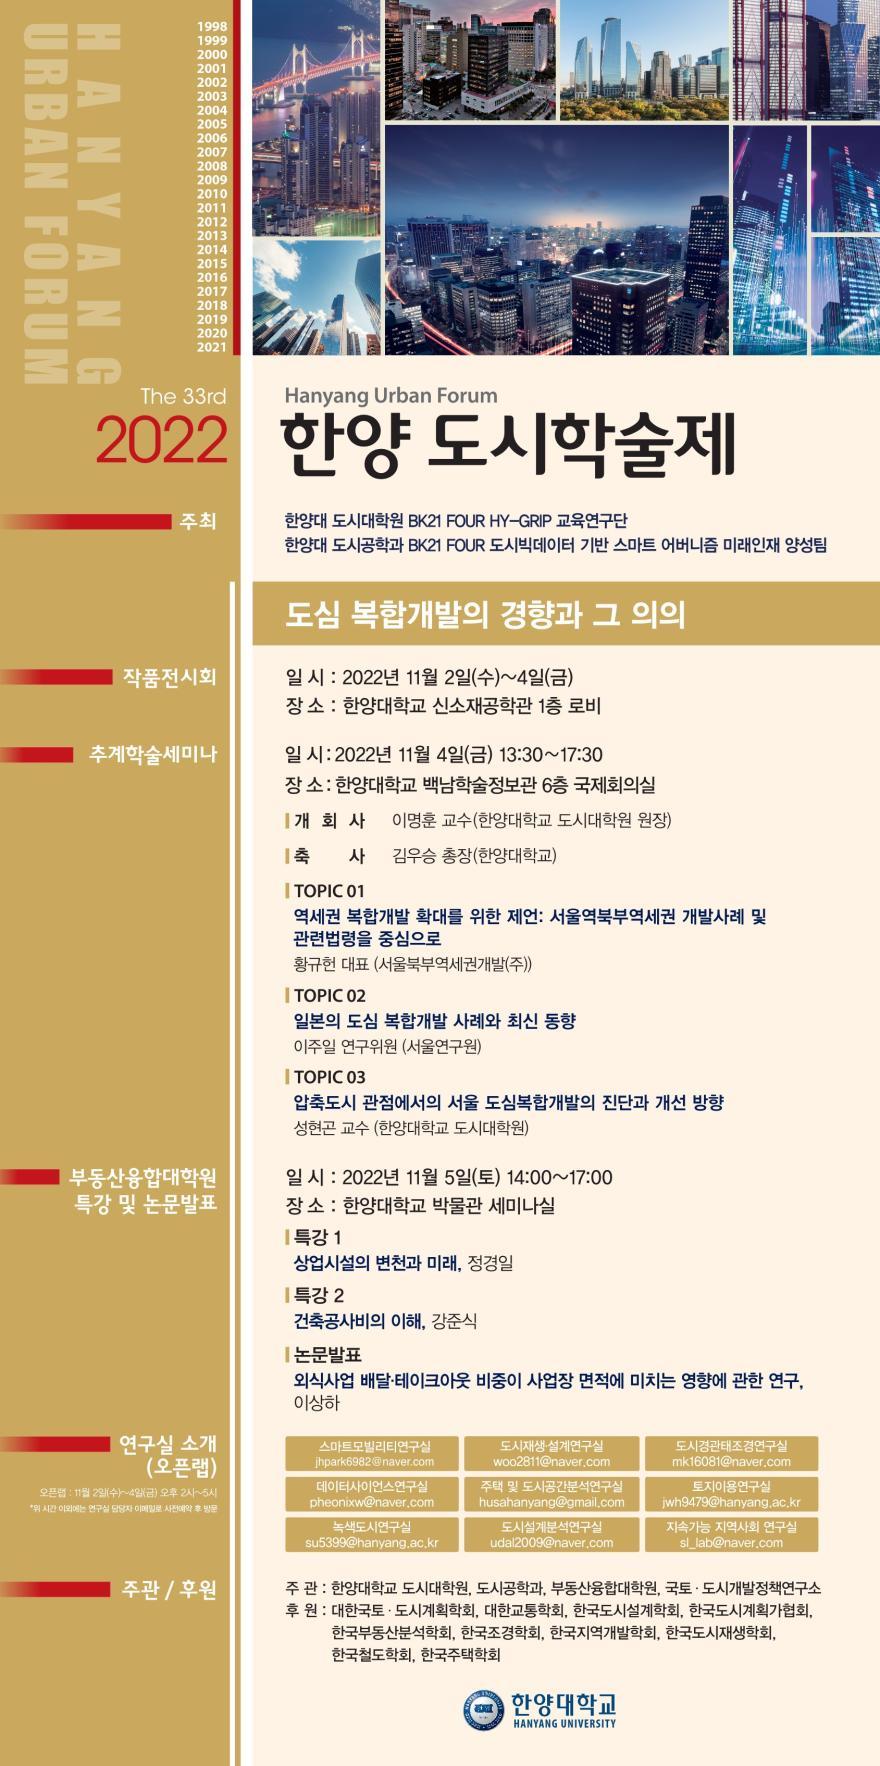 You are currently viewing [한양대학교] 2022 한양 도시학술제